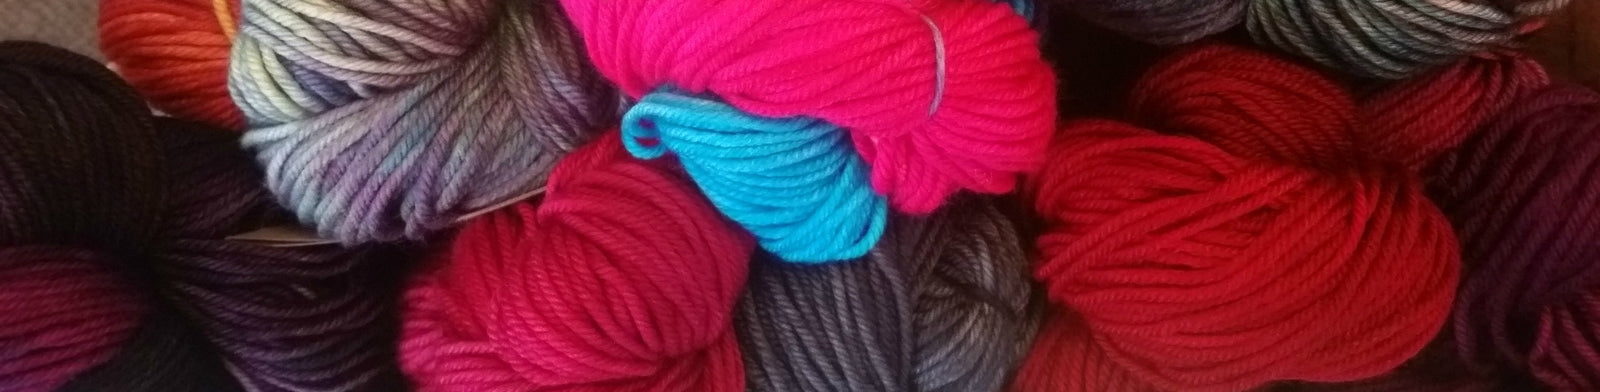 7 Tips For Knitting With Cotton Yarn 